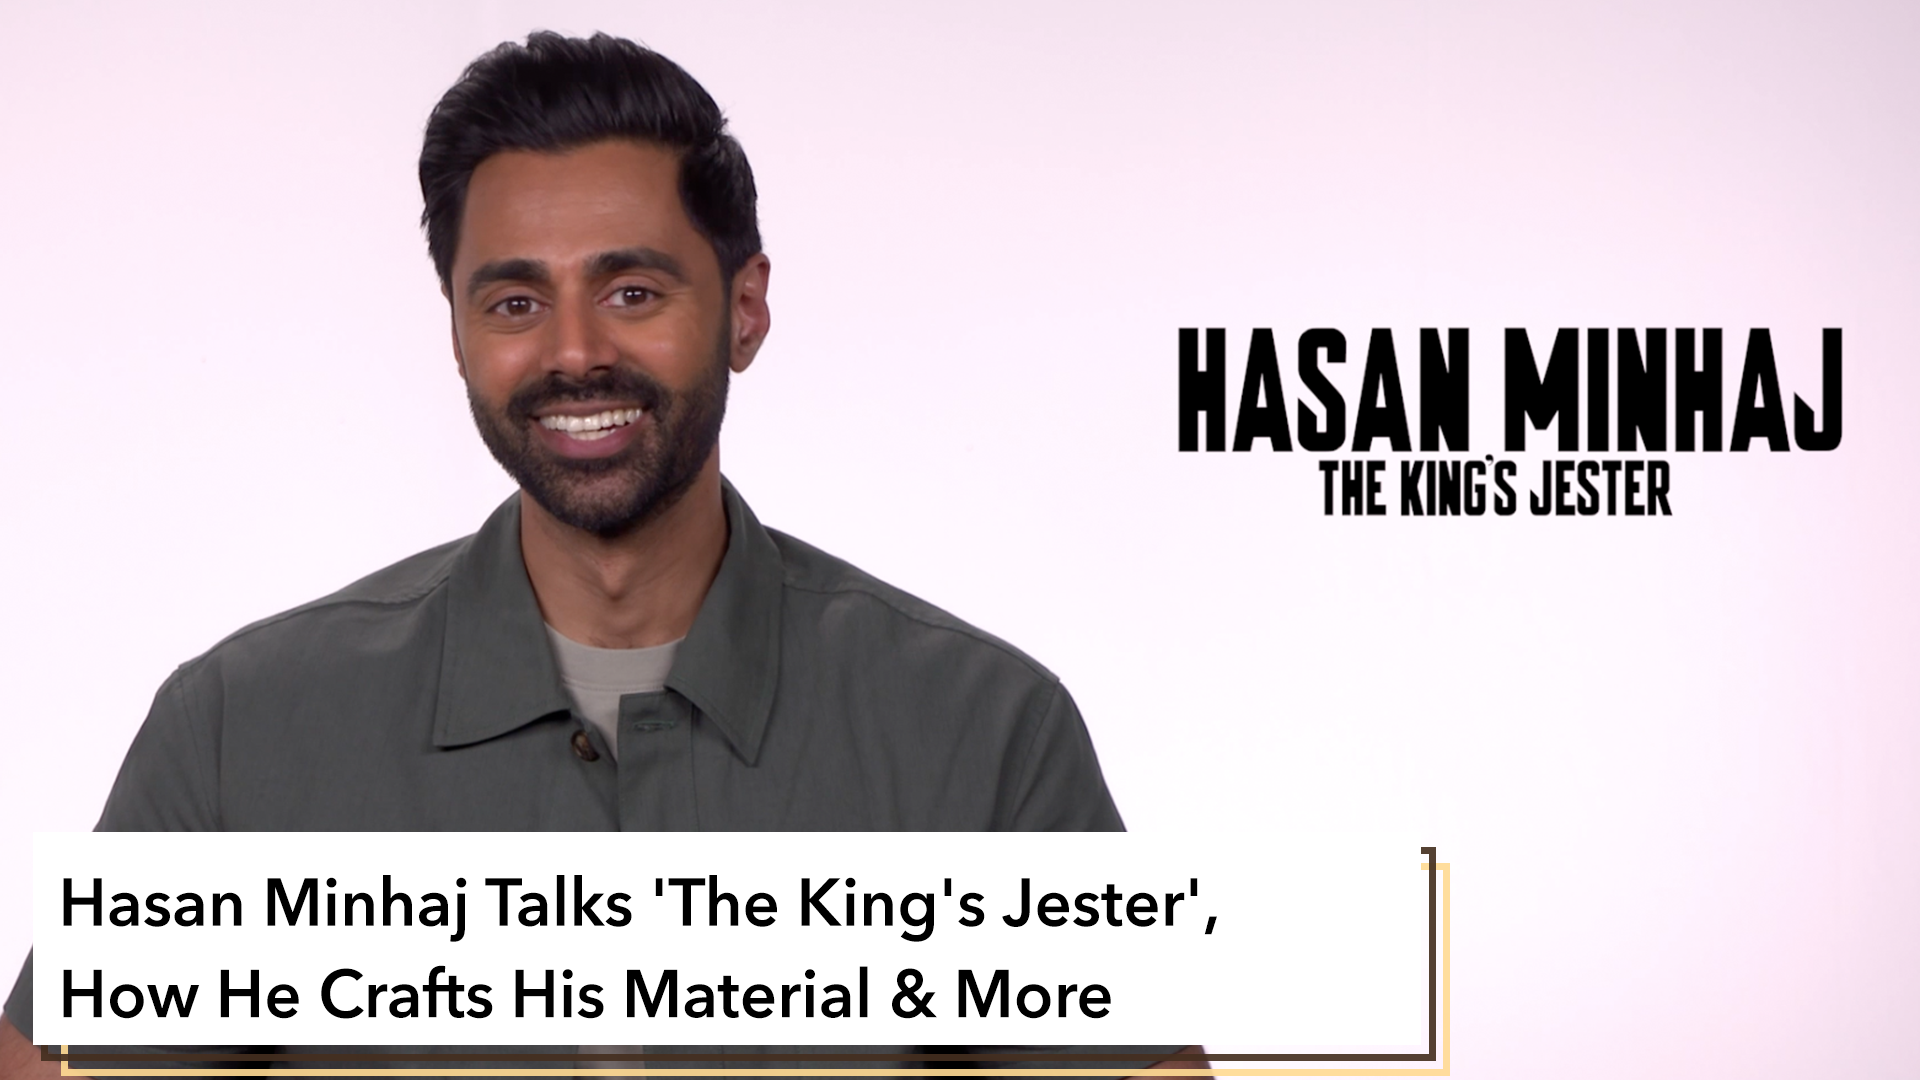 Interview: Hasan Minhaj Talks ‘The King’s Jester’, How He Crafts His Material & More